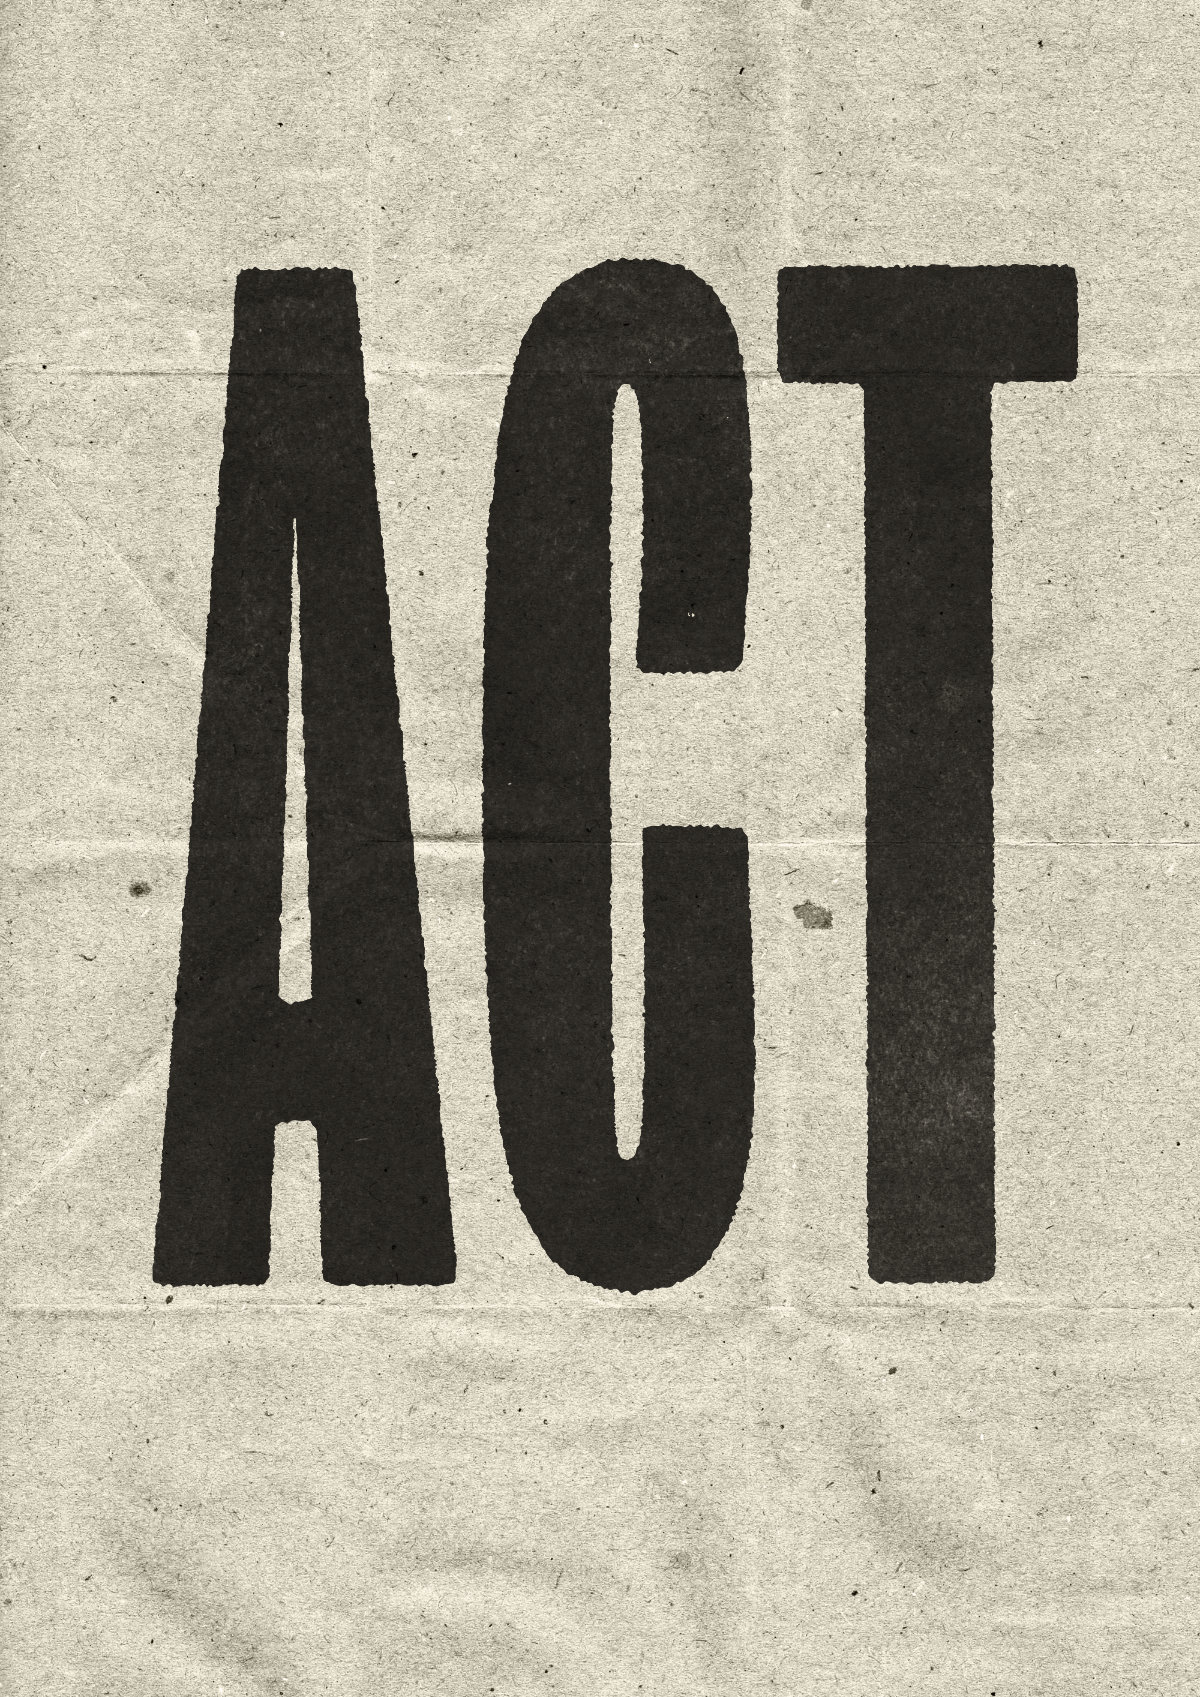 ACT – Poster by Michael Leonhartsberger